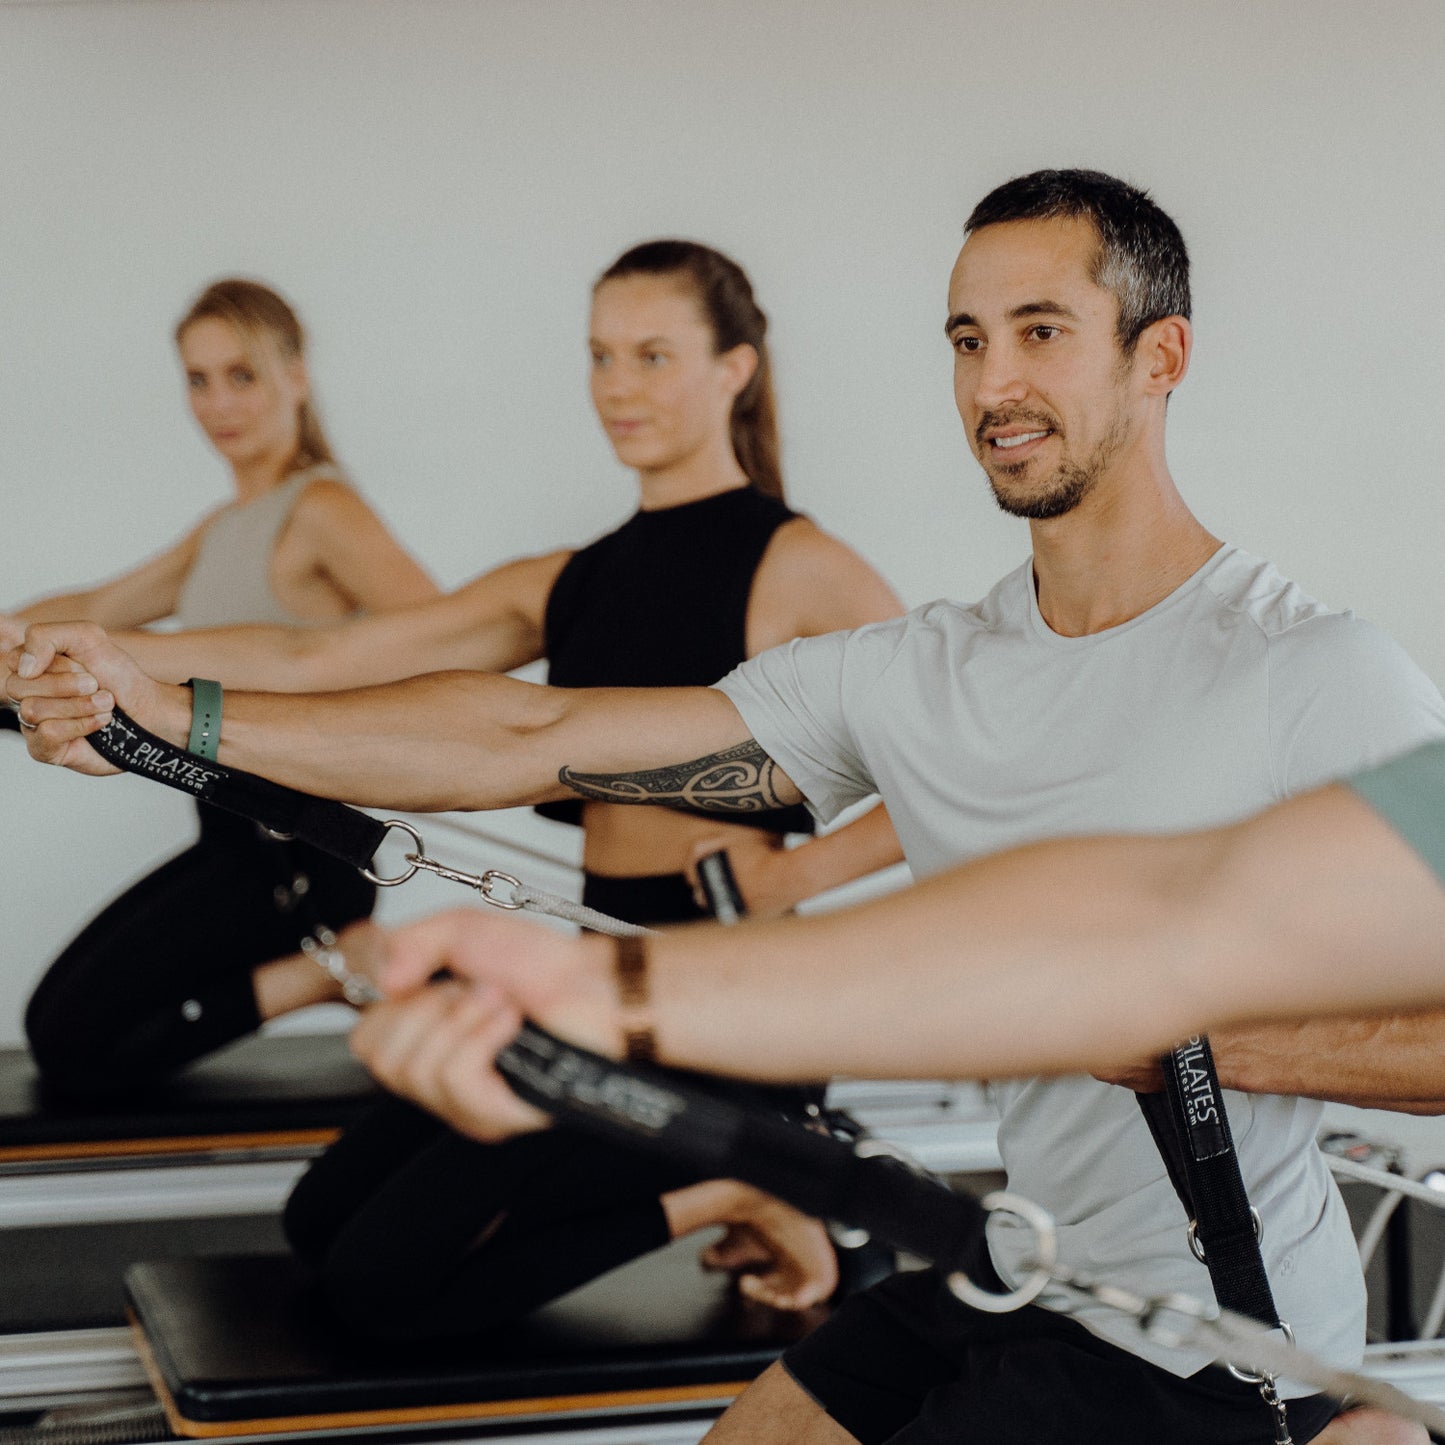 Reformer Pilates: This Is What to Expect From a Class